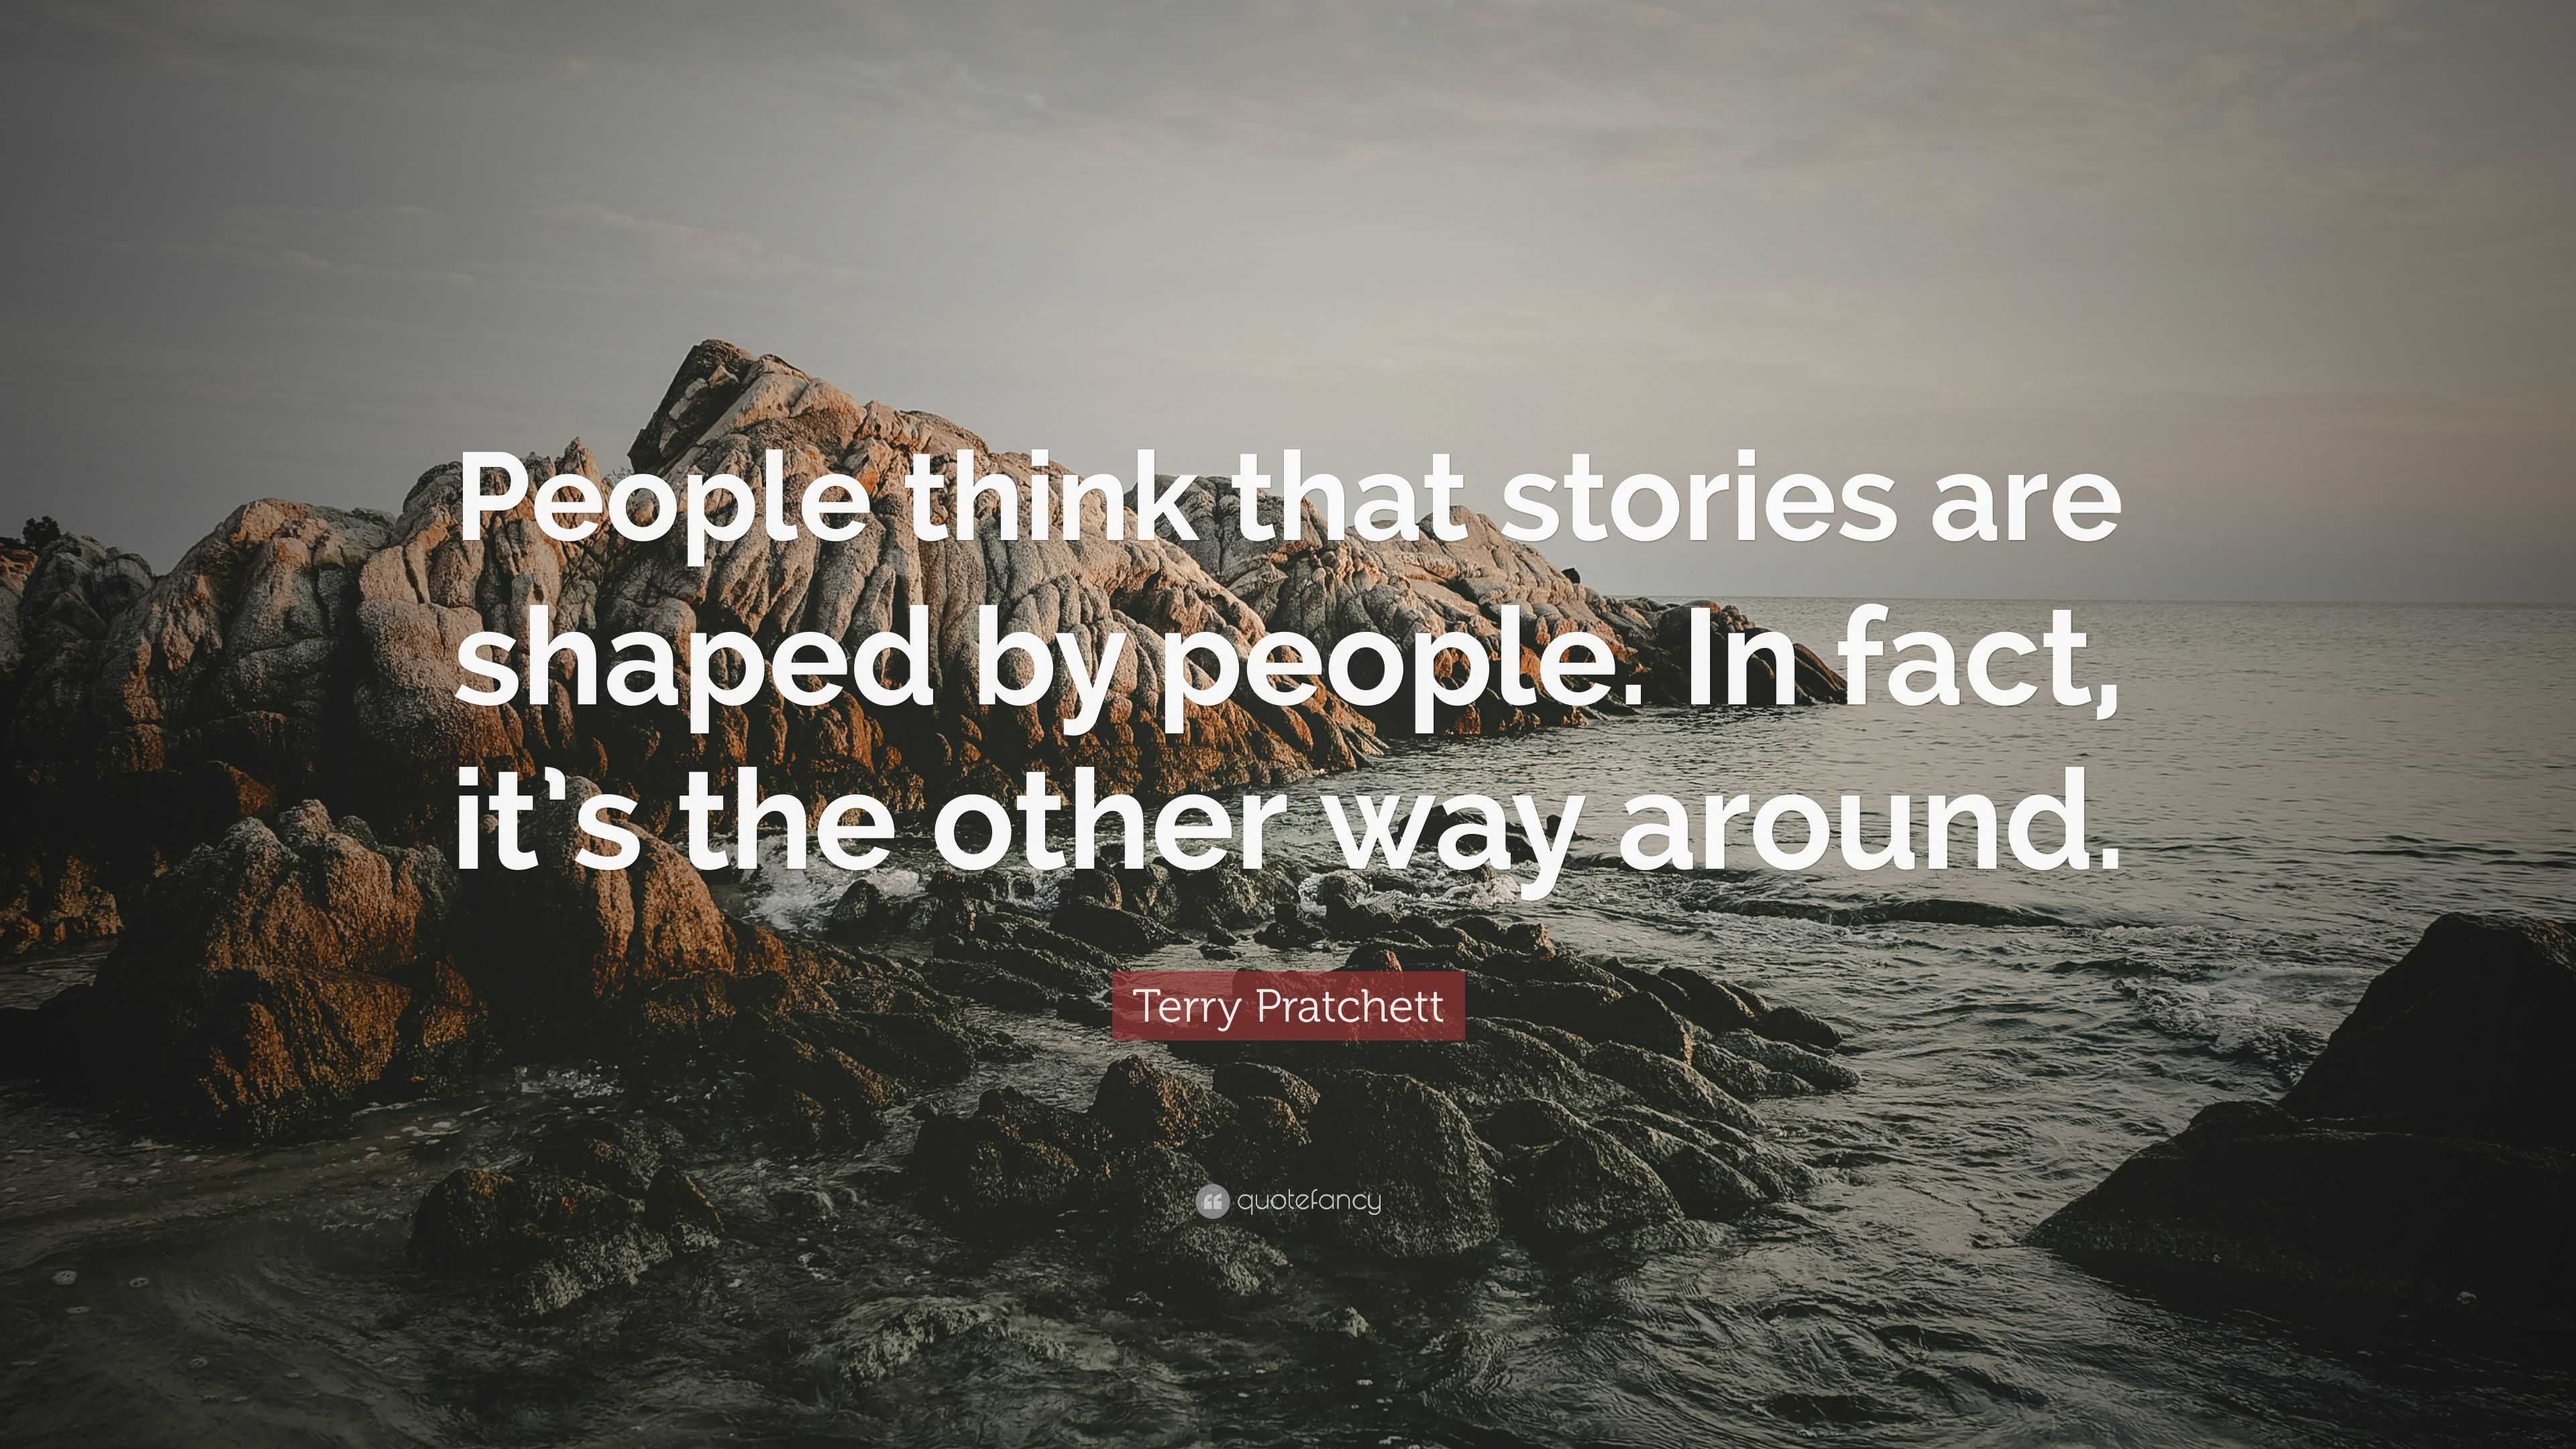 Terry Pratchett Quote: “People think that stories are shaped by people ...